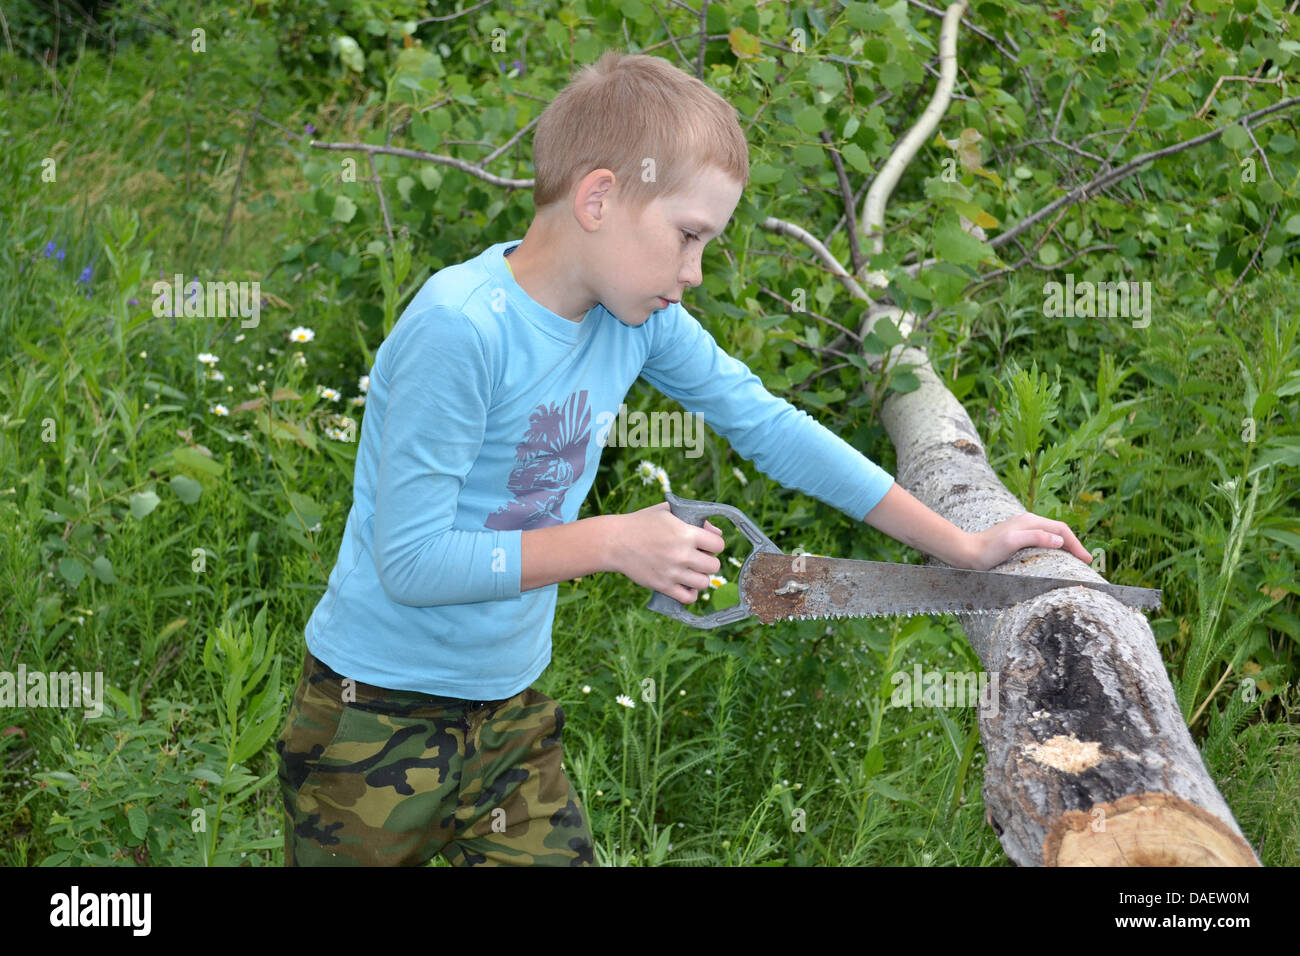 the boy with a hacksaw stands near a tree Stock Photo